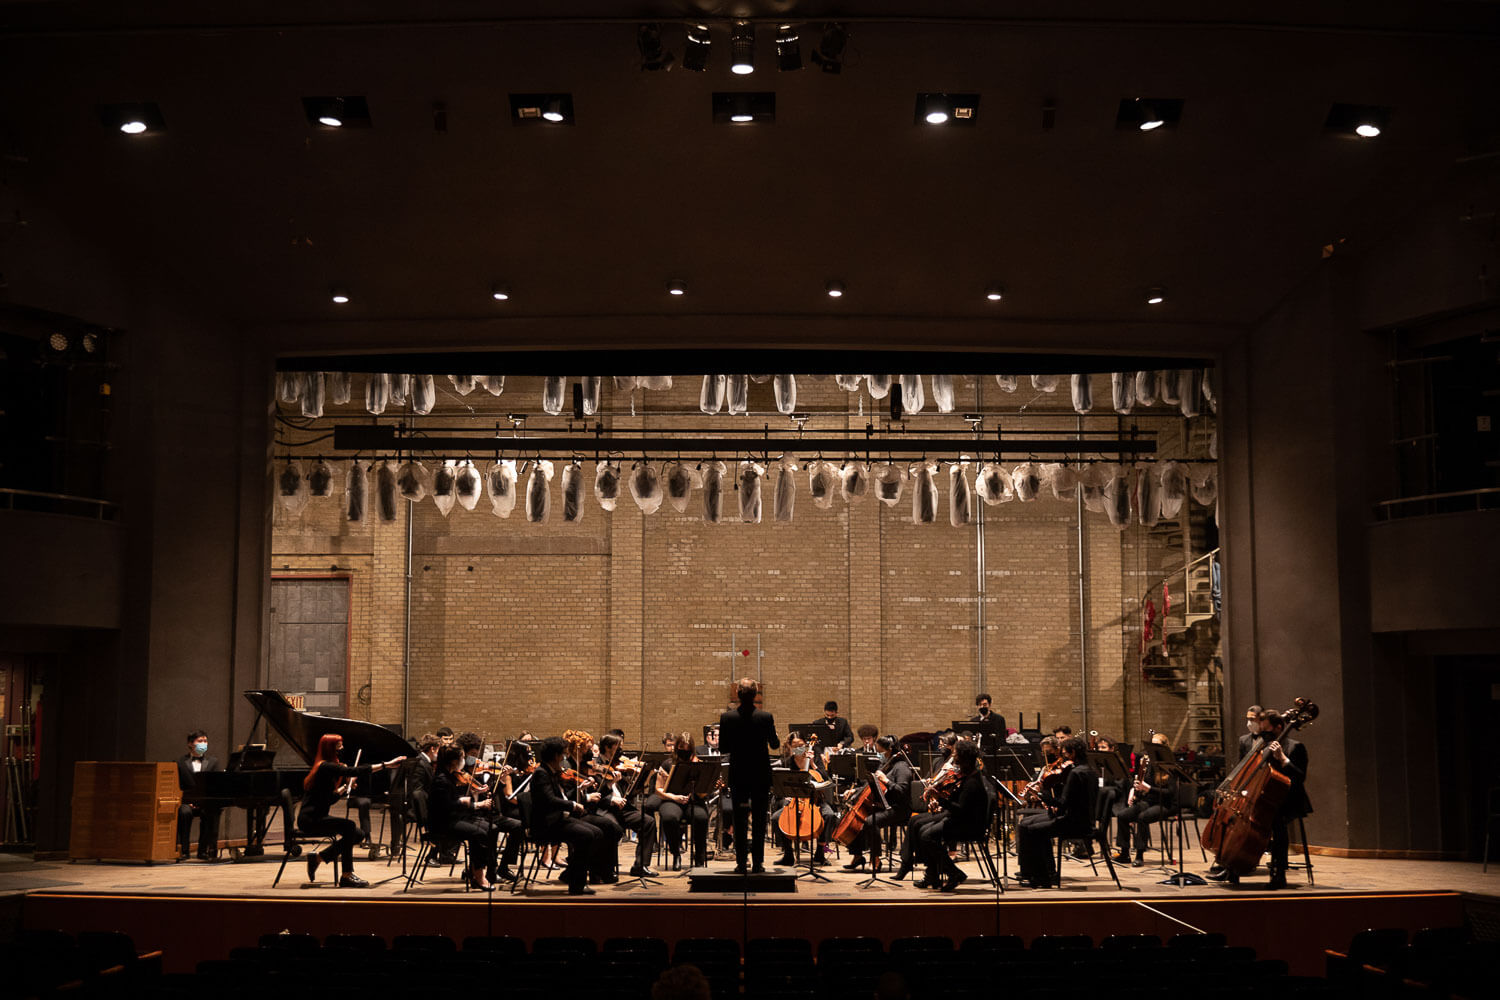 The Brooklyn College Conservatory of Music orchestra held a free concert at the Claire Tow Theater on March 3. The program featured works by Felix Mendelssohn and Sergei Prokofiev, among others.